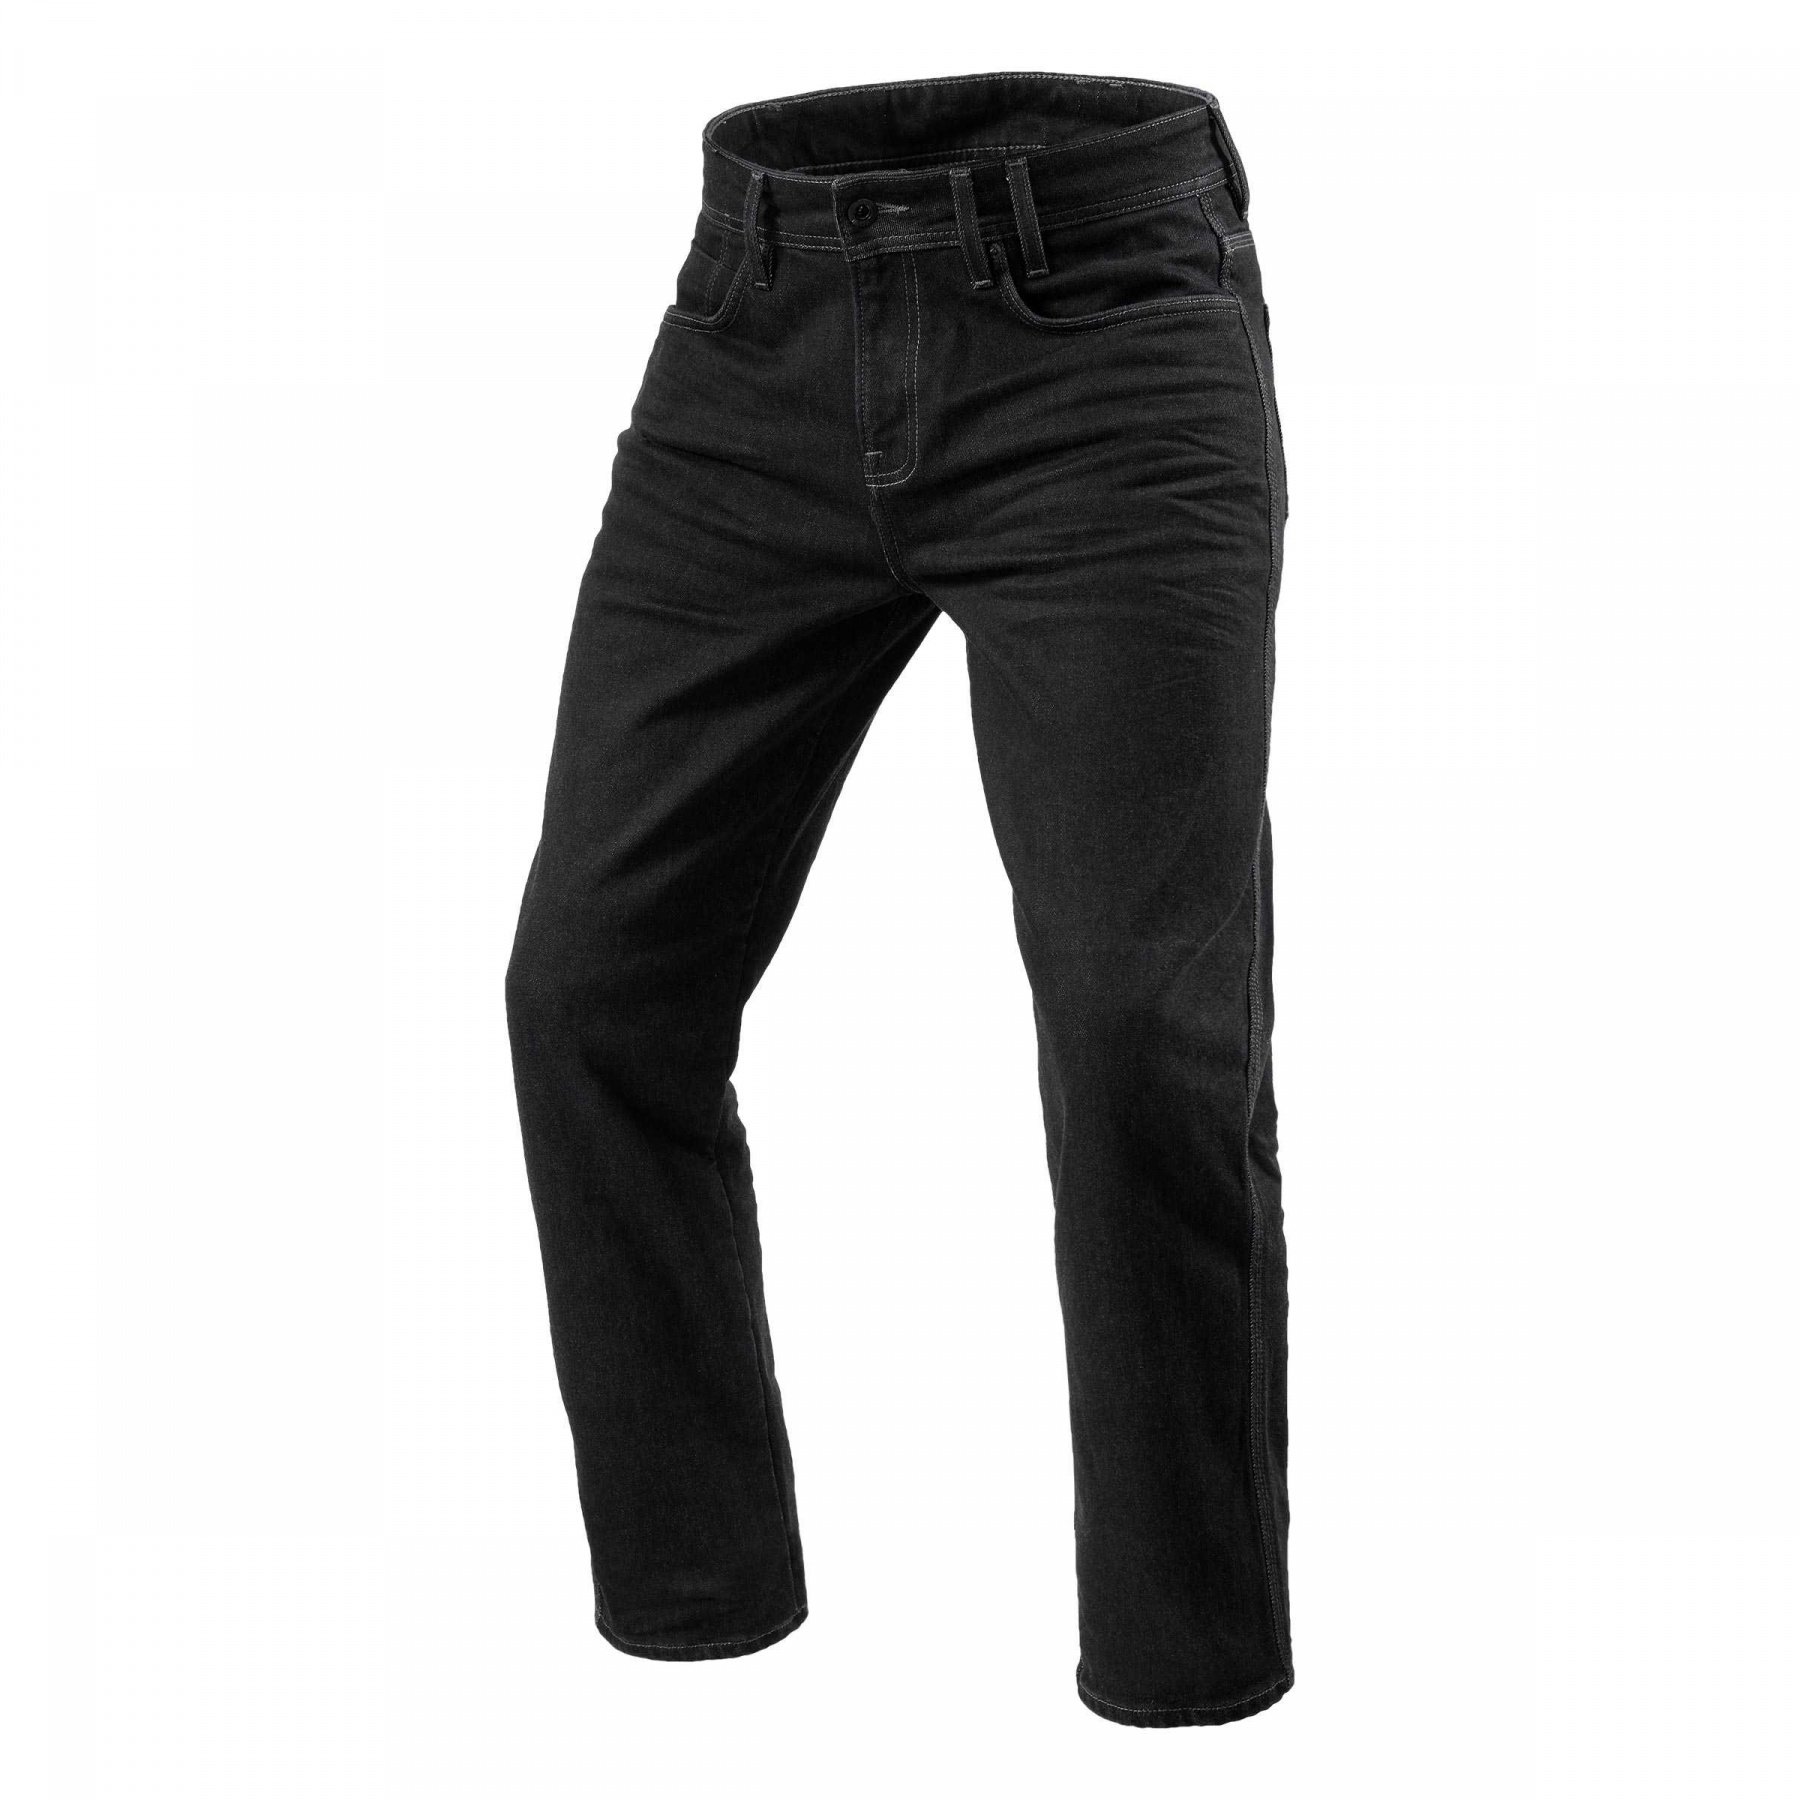 Image of REV'IT! Jeans Lombard 3 RF Dark Blue Used Motorcycle Jeans Size L34/W31 ID 8700001338240